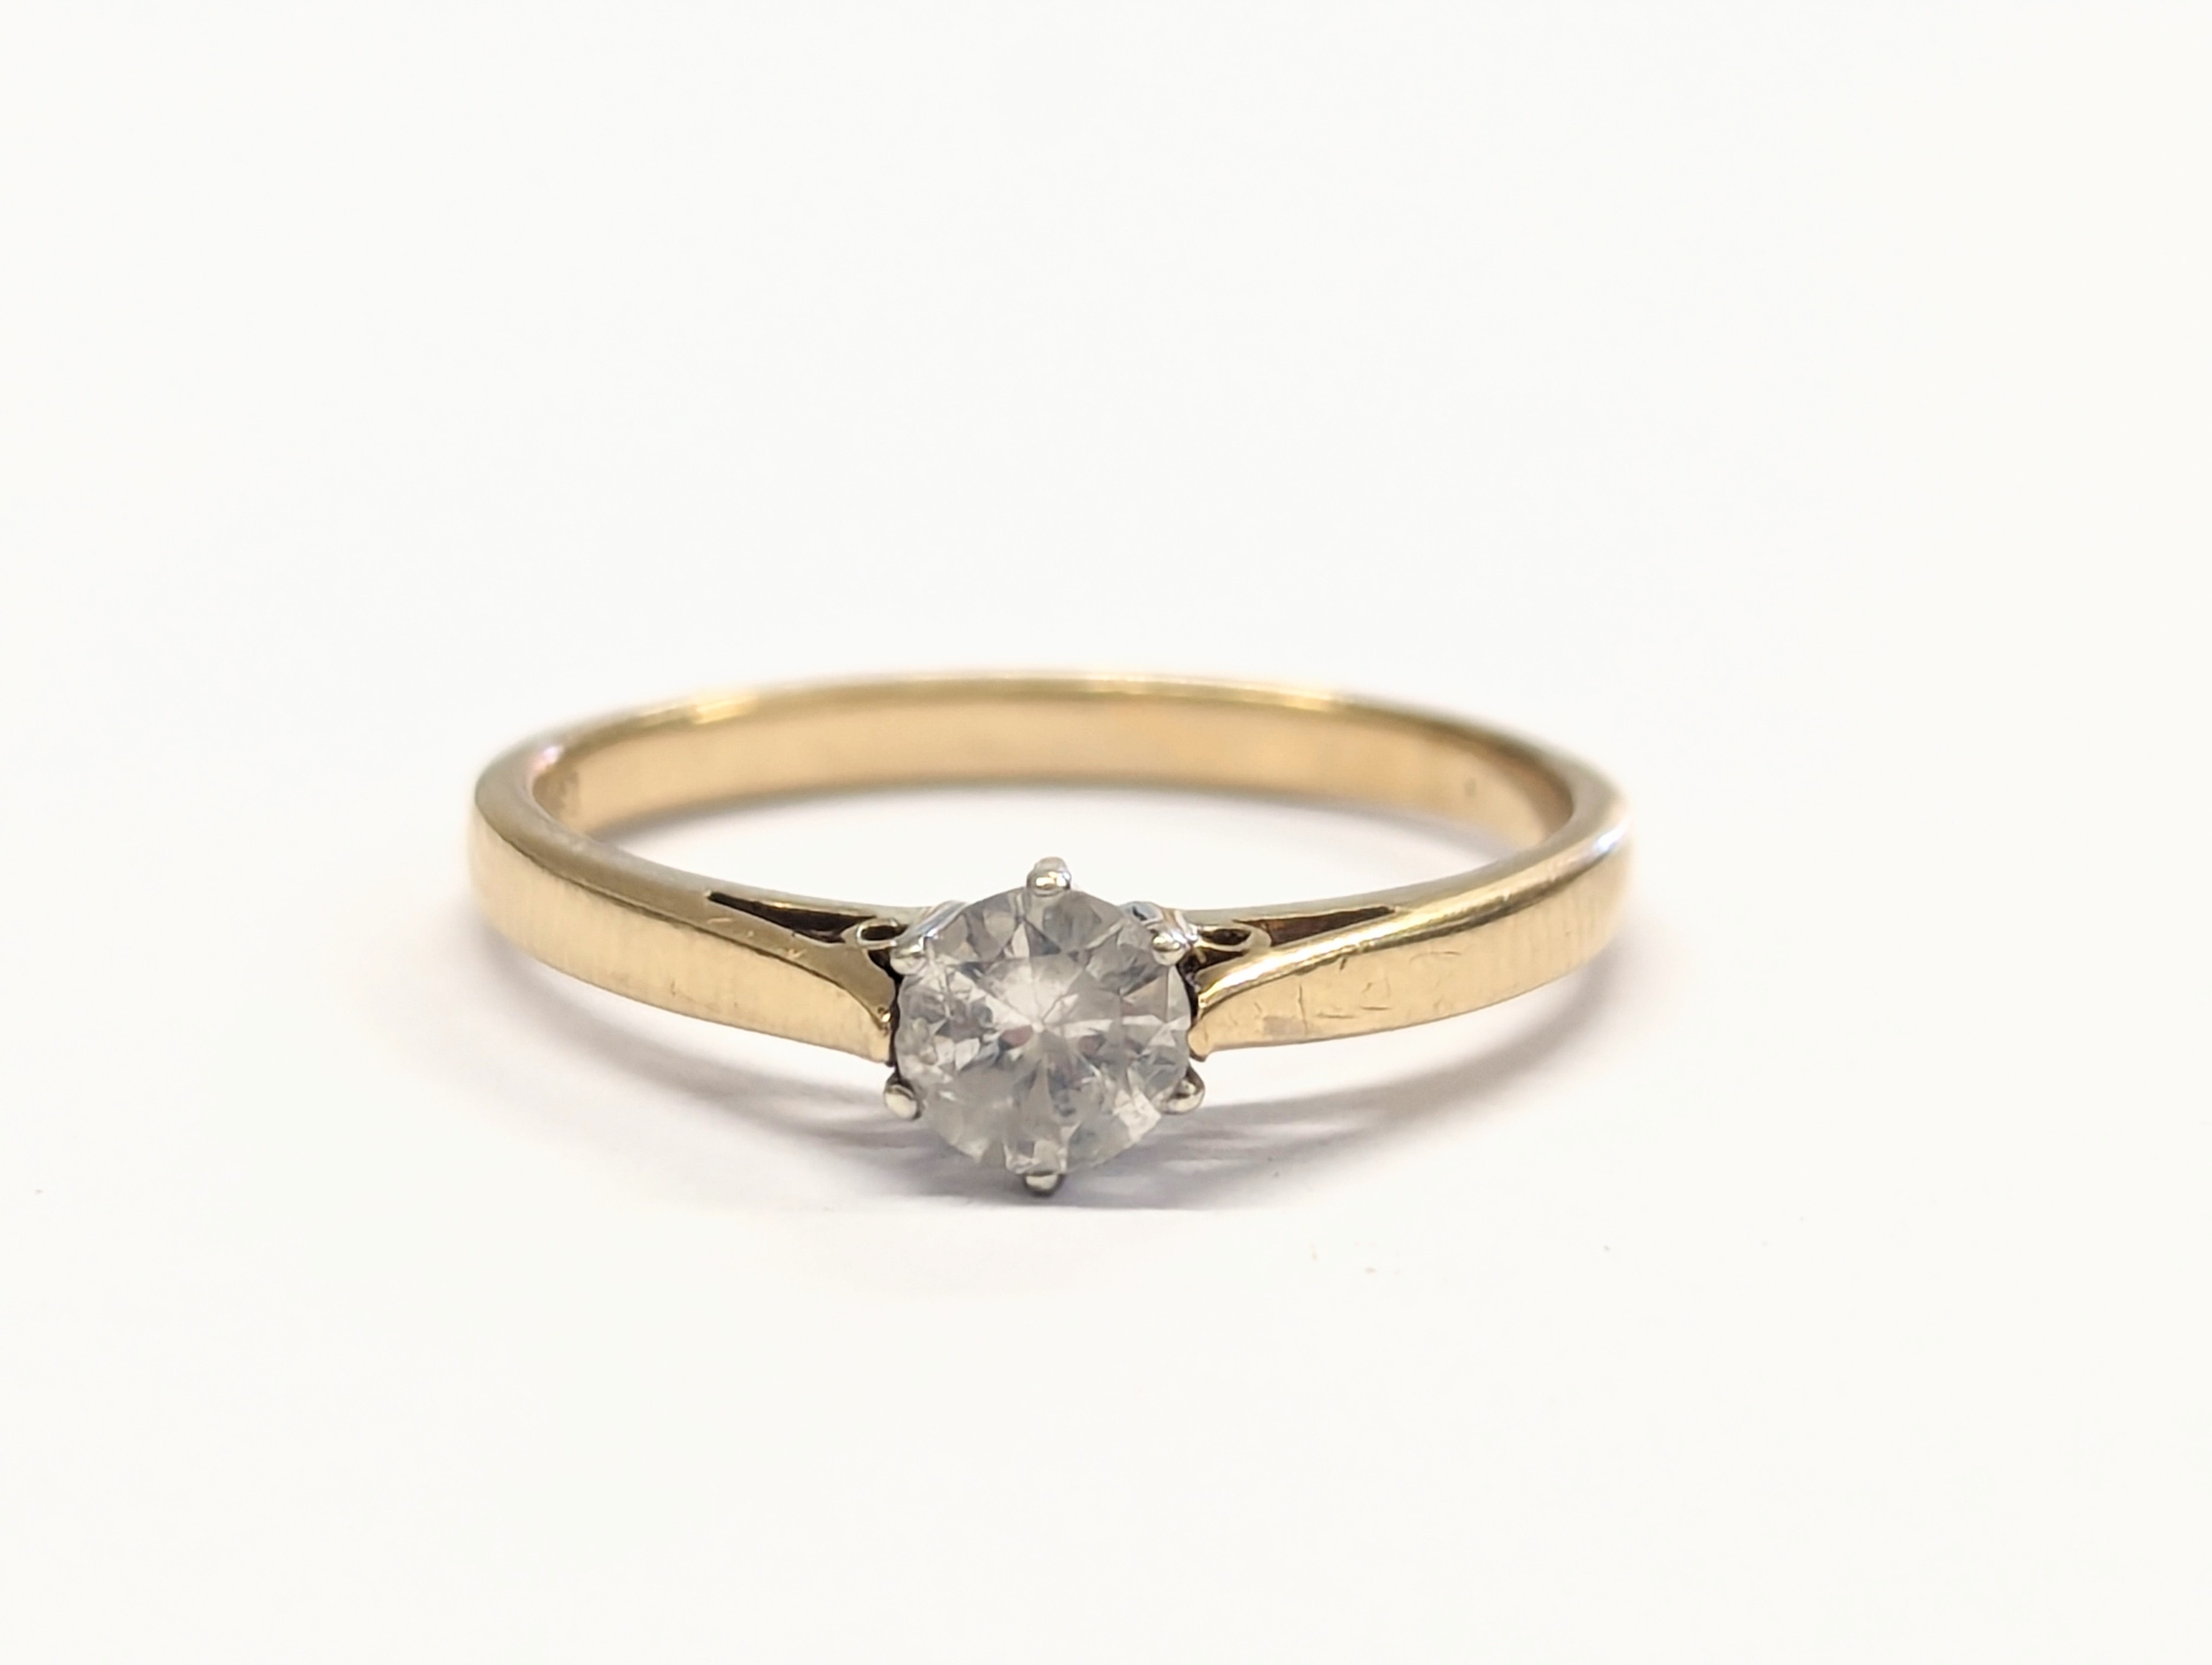 A 9ct gold and diamond ring. 1.8g. Size UK N.